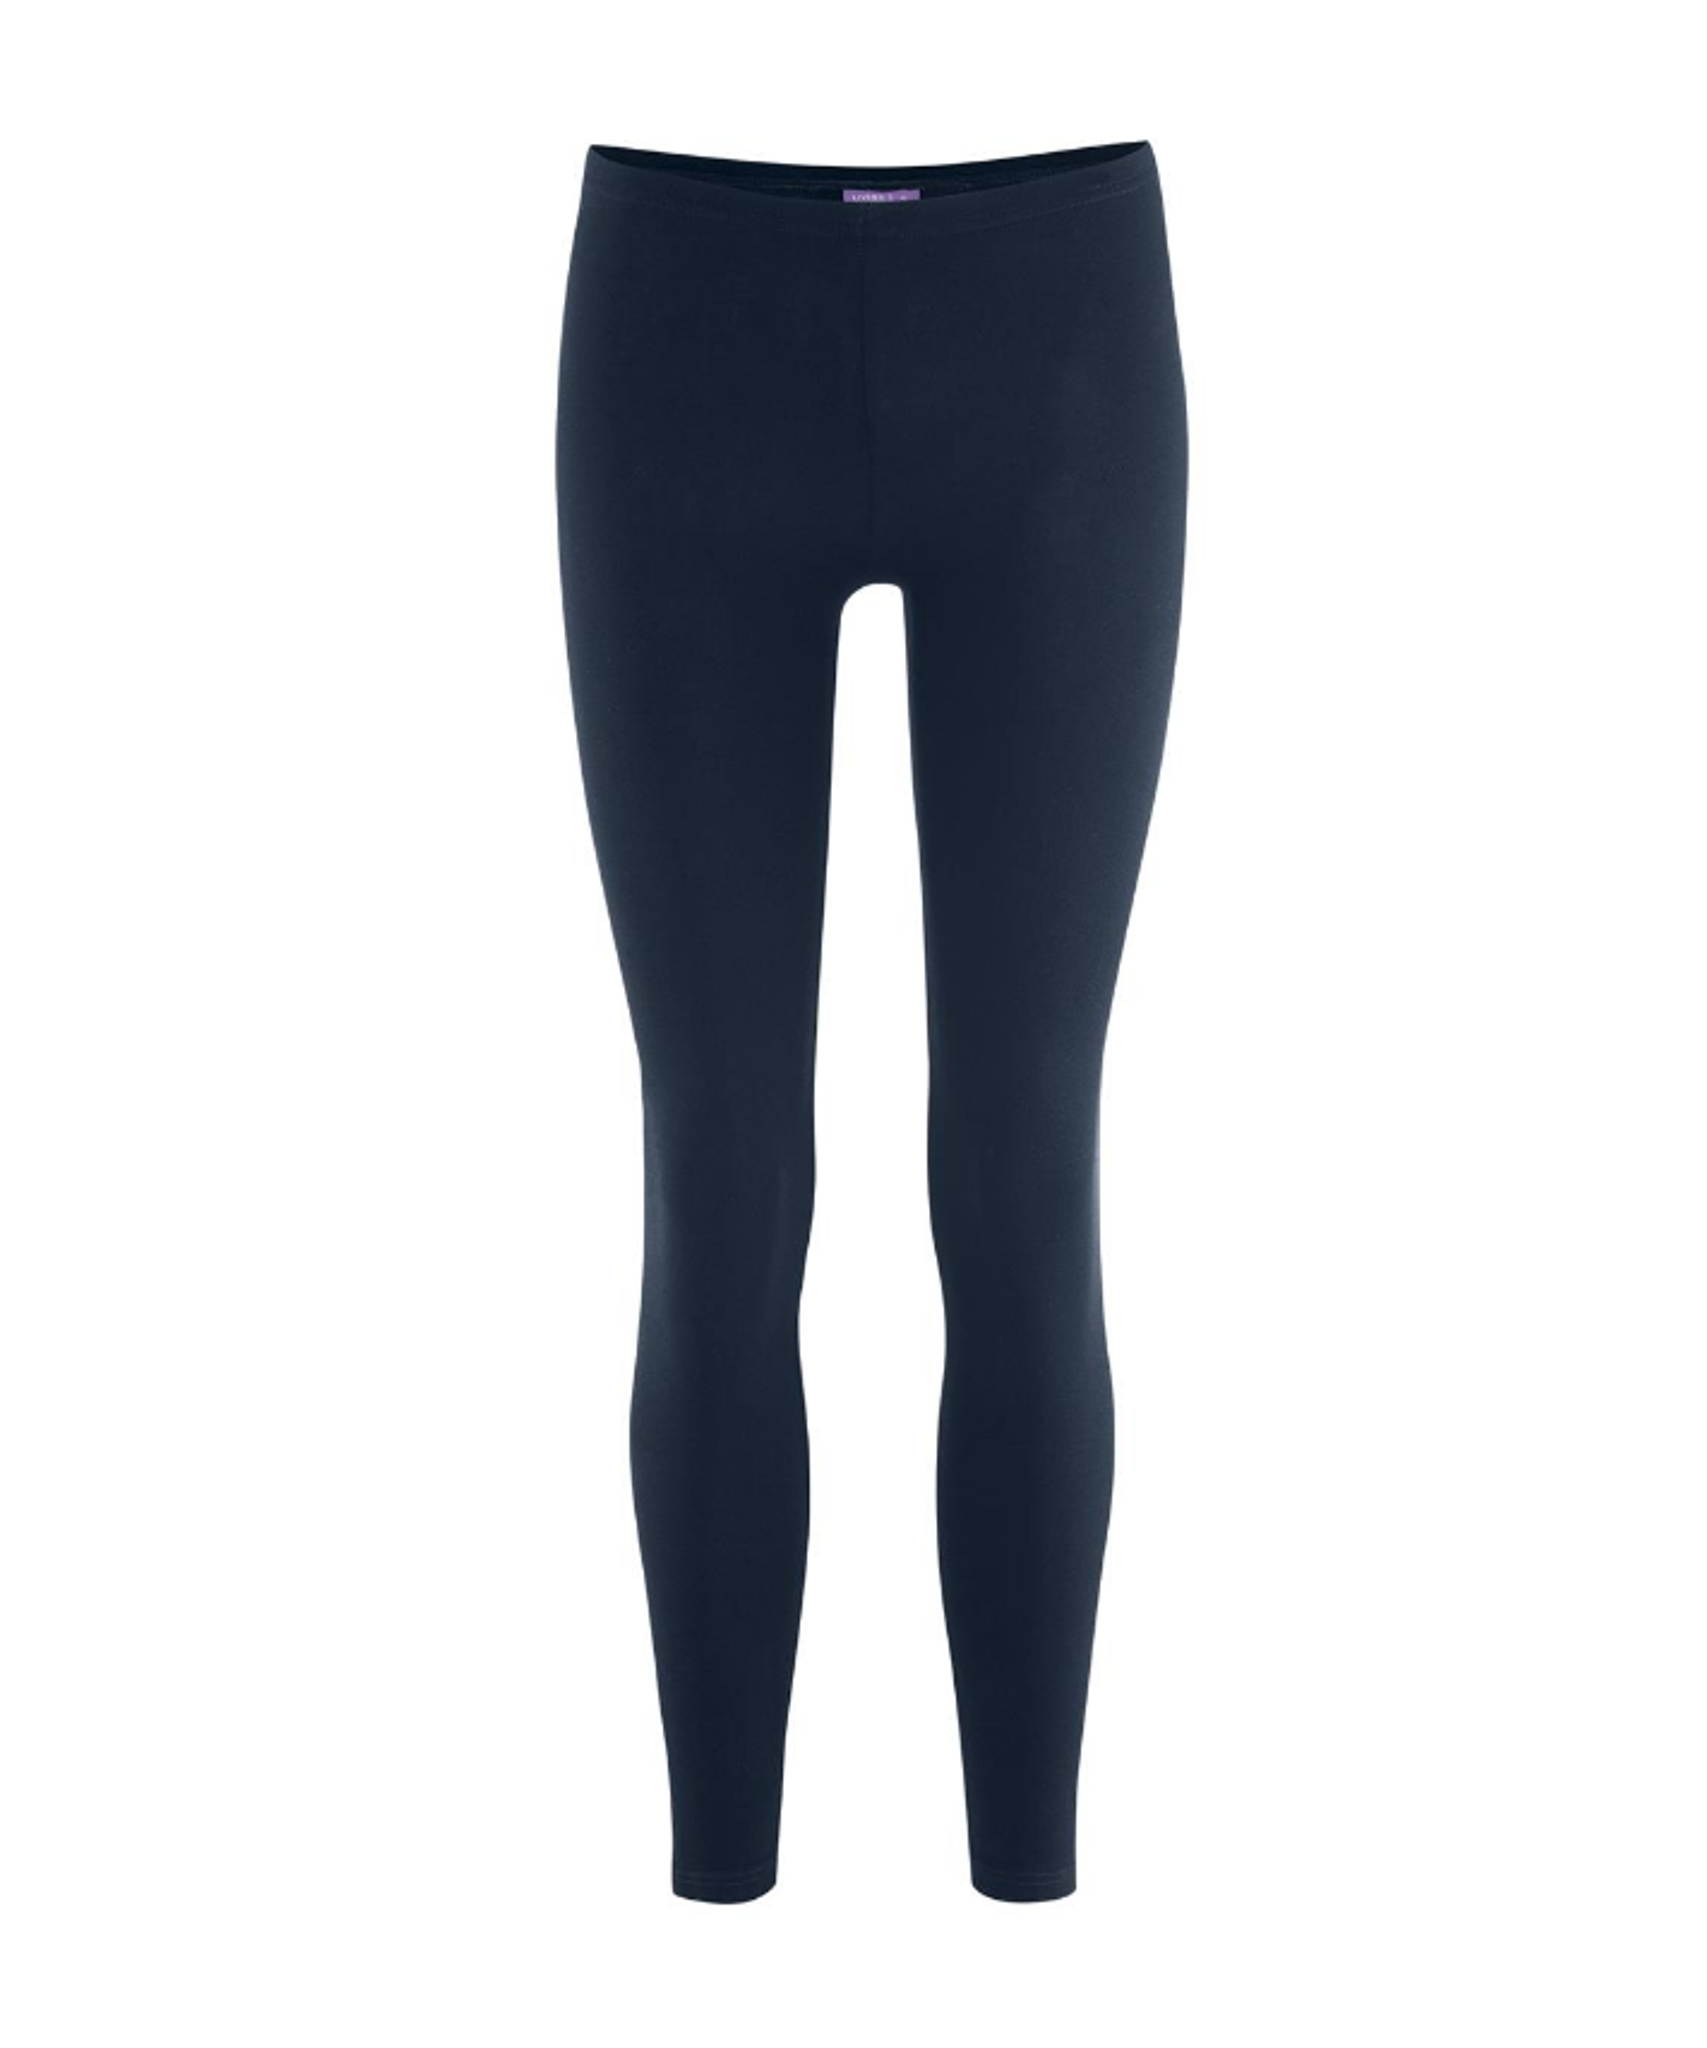 Organic Cotton Ankle Leggings - in Black, Navy, Slate Grey, French Roast,  or Midnight Blue